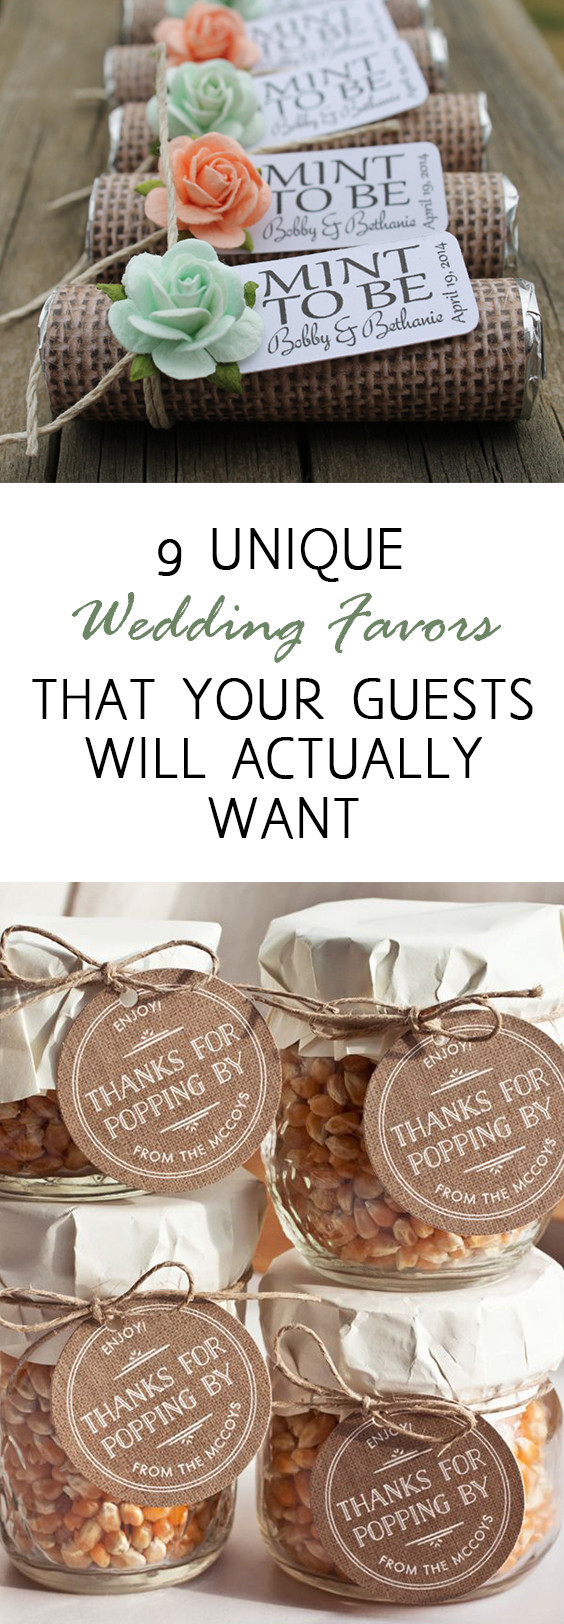 DIY Wedding Party Favors
 9 Unique Wedding Favors that Your Guests Will Actually